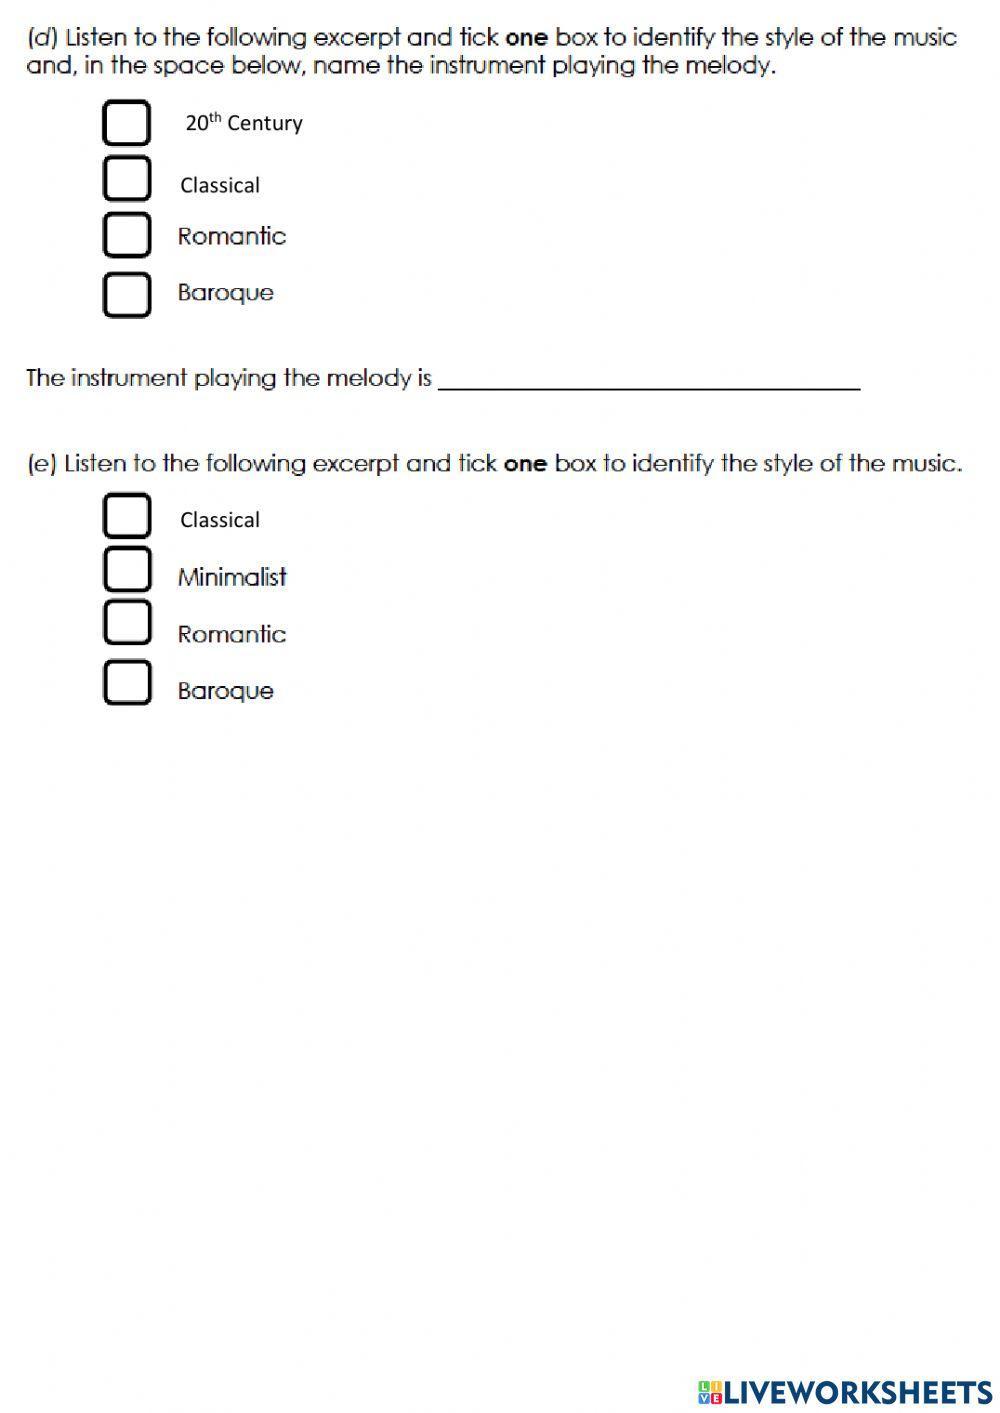 National 5 Practise Question 1e